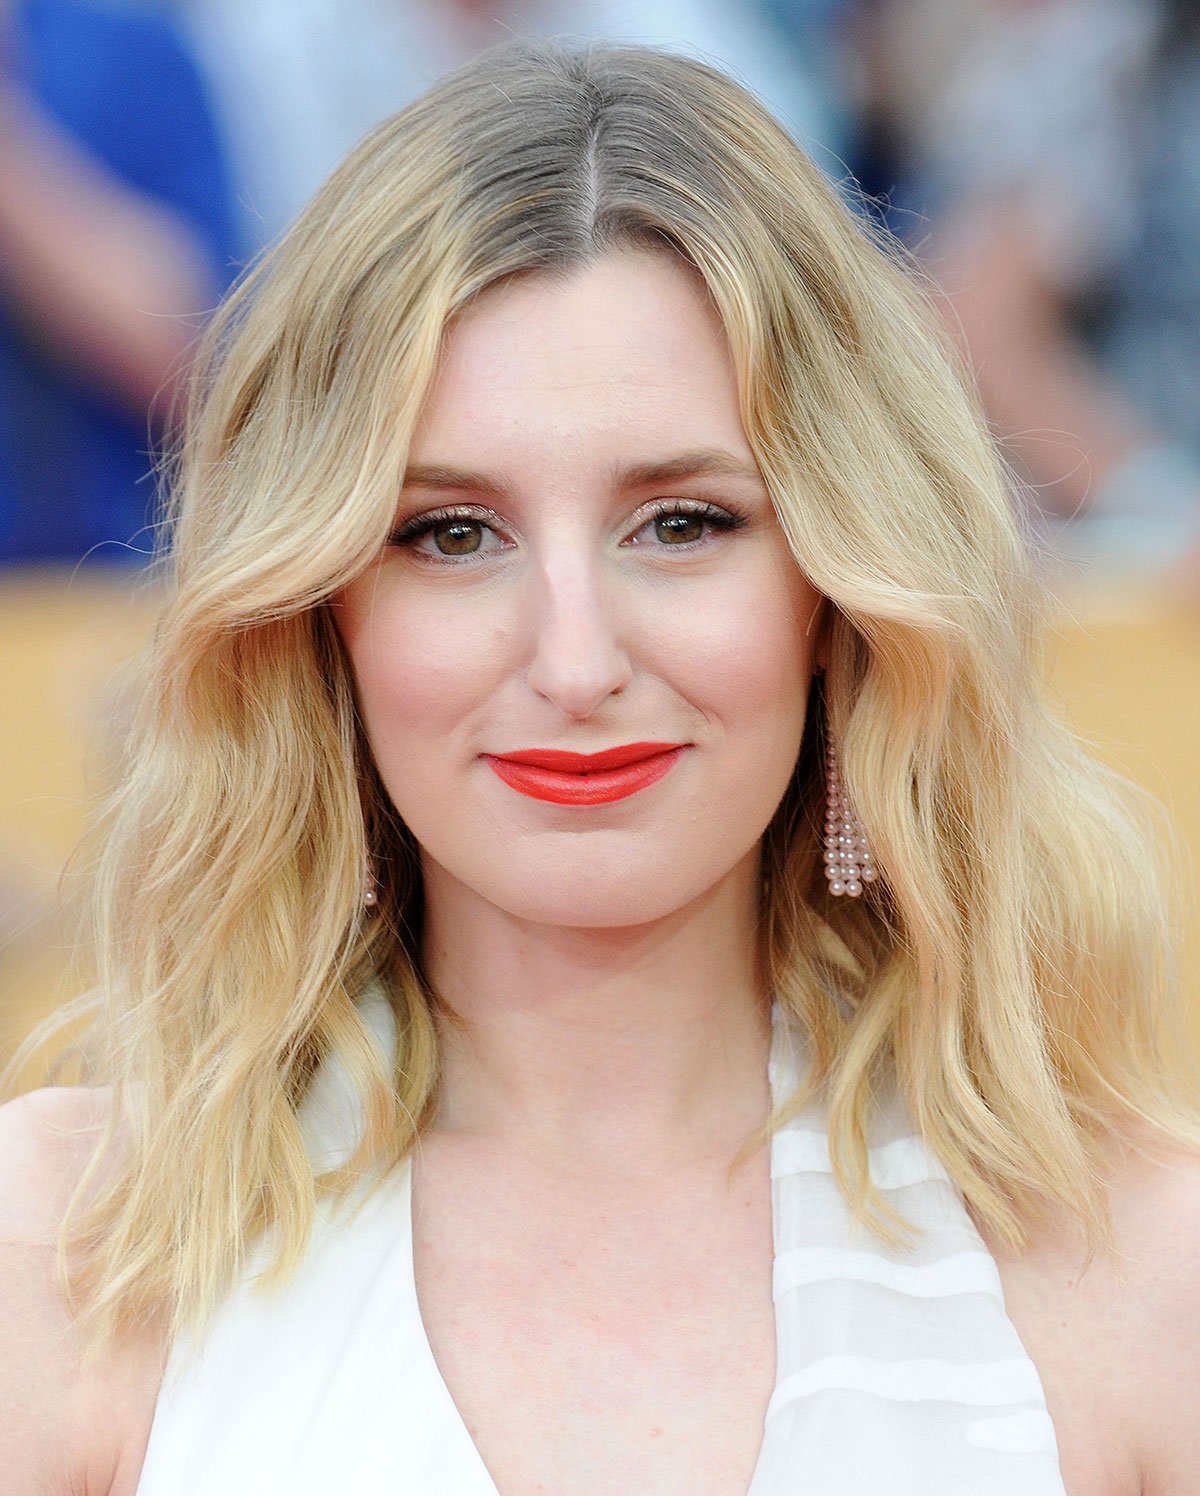 LAURA CARMICHAEL at 2015 Screen Actor Guild Awards in Los Angeles.